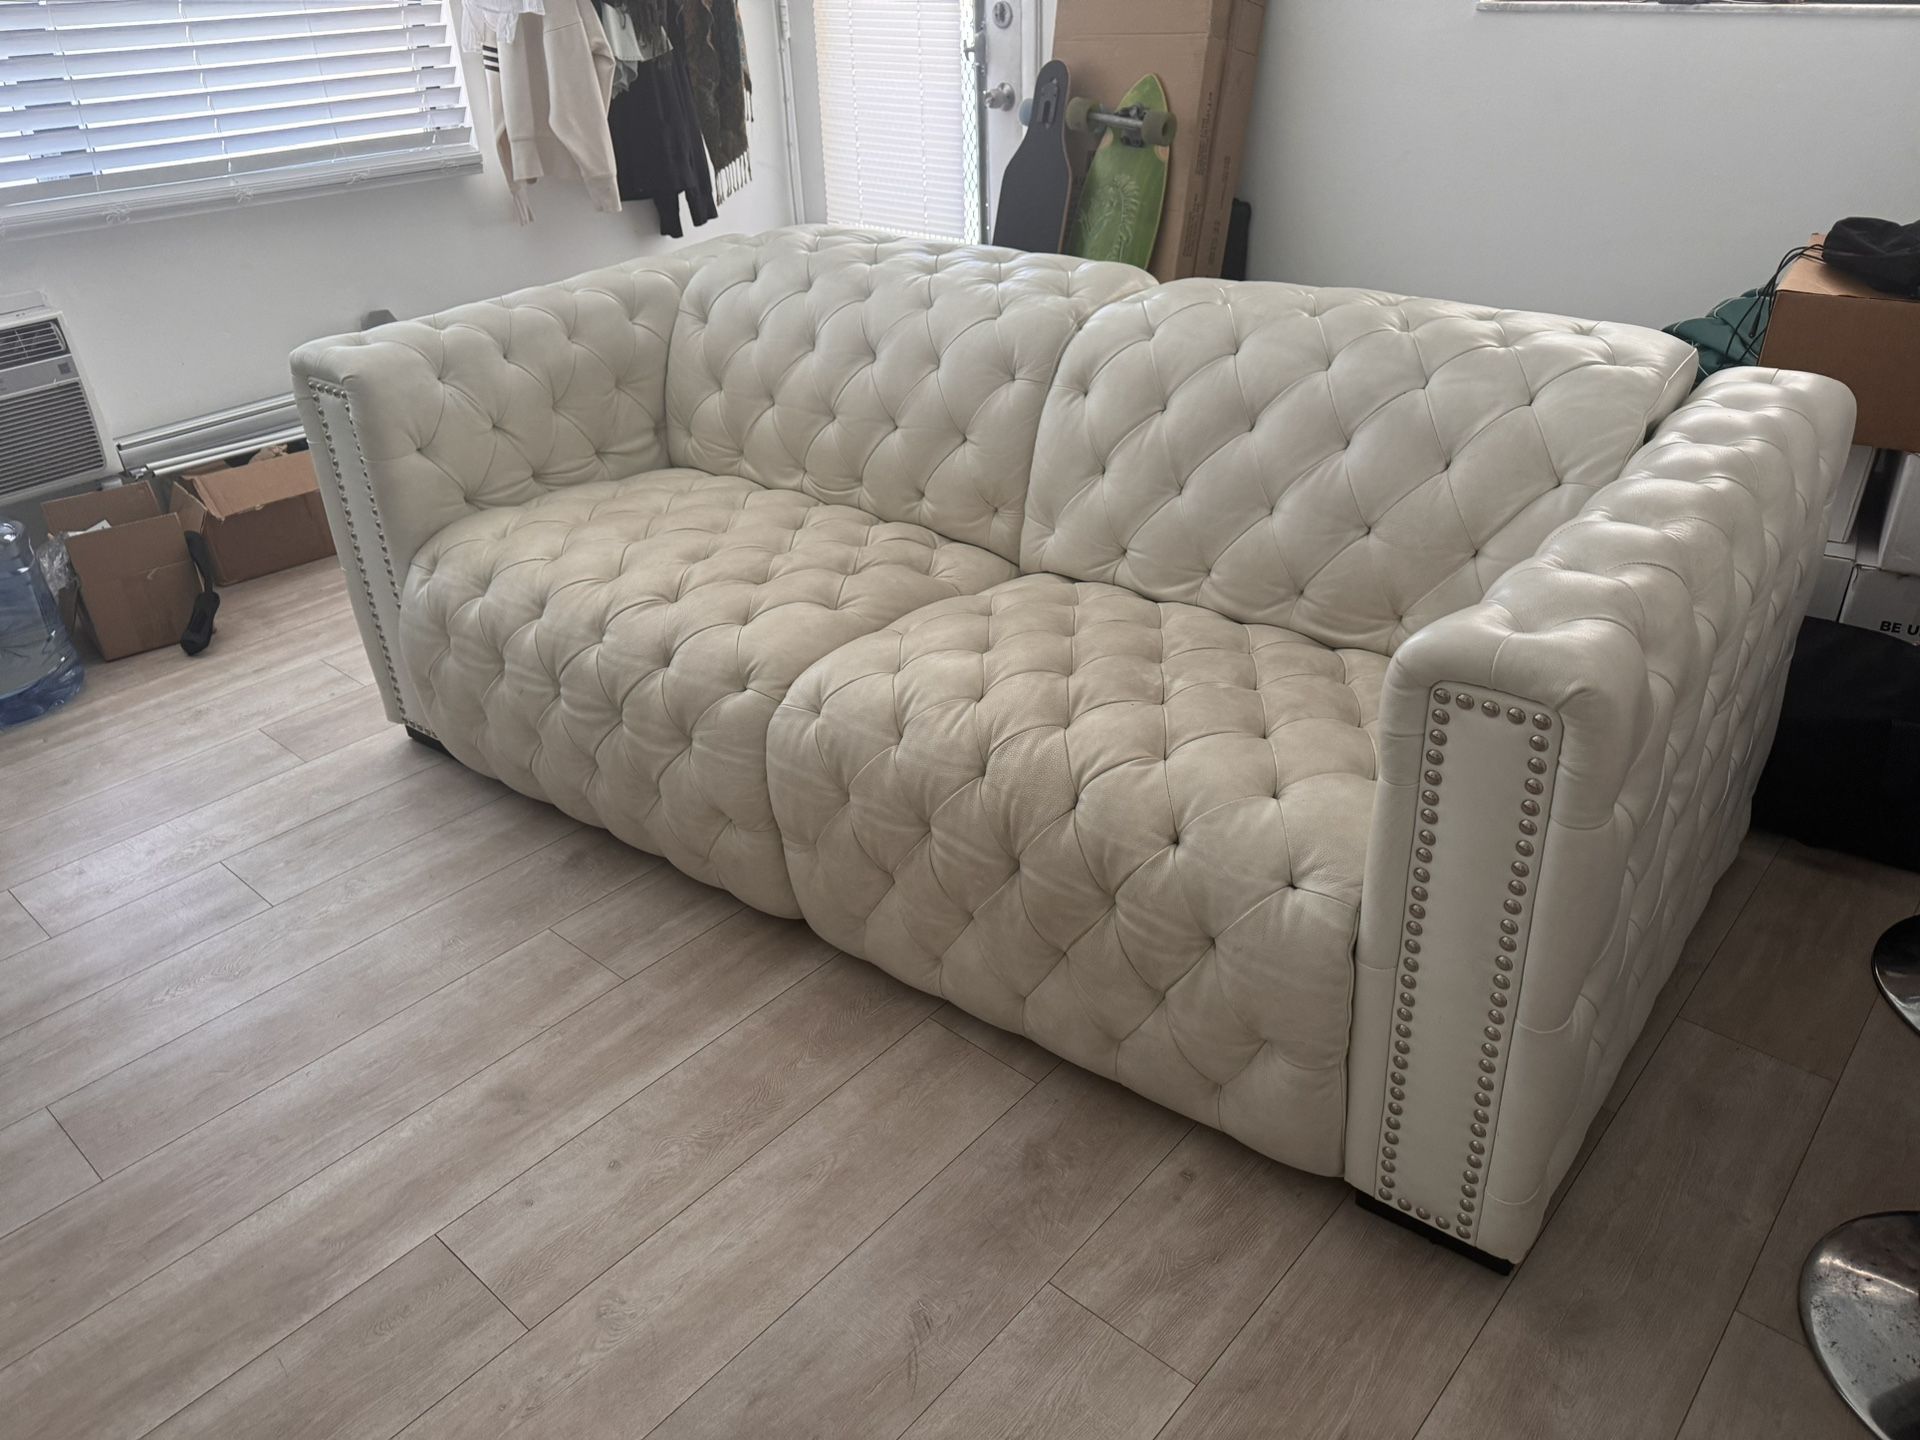 White Leather Couch (reclinable)